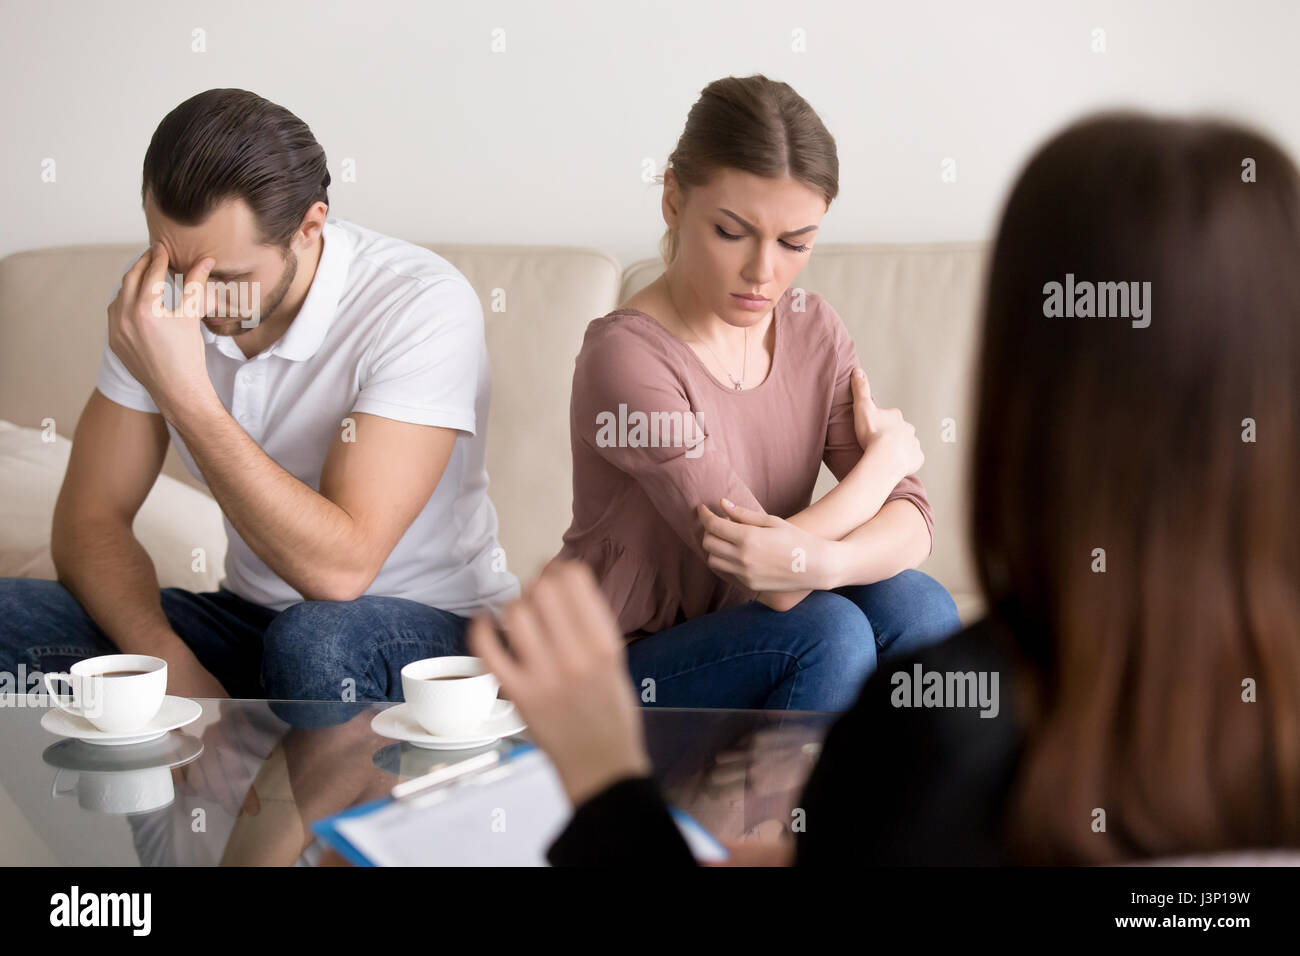 Family therapy, couple after argument not talking to each other Stock Photo